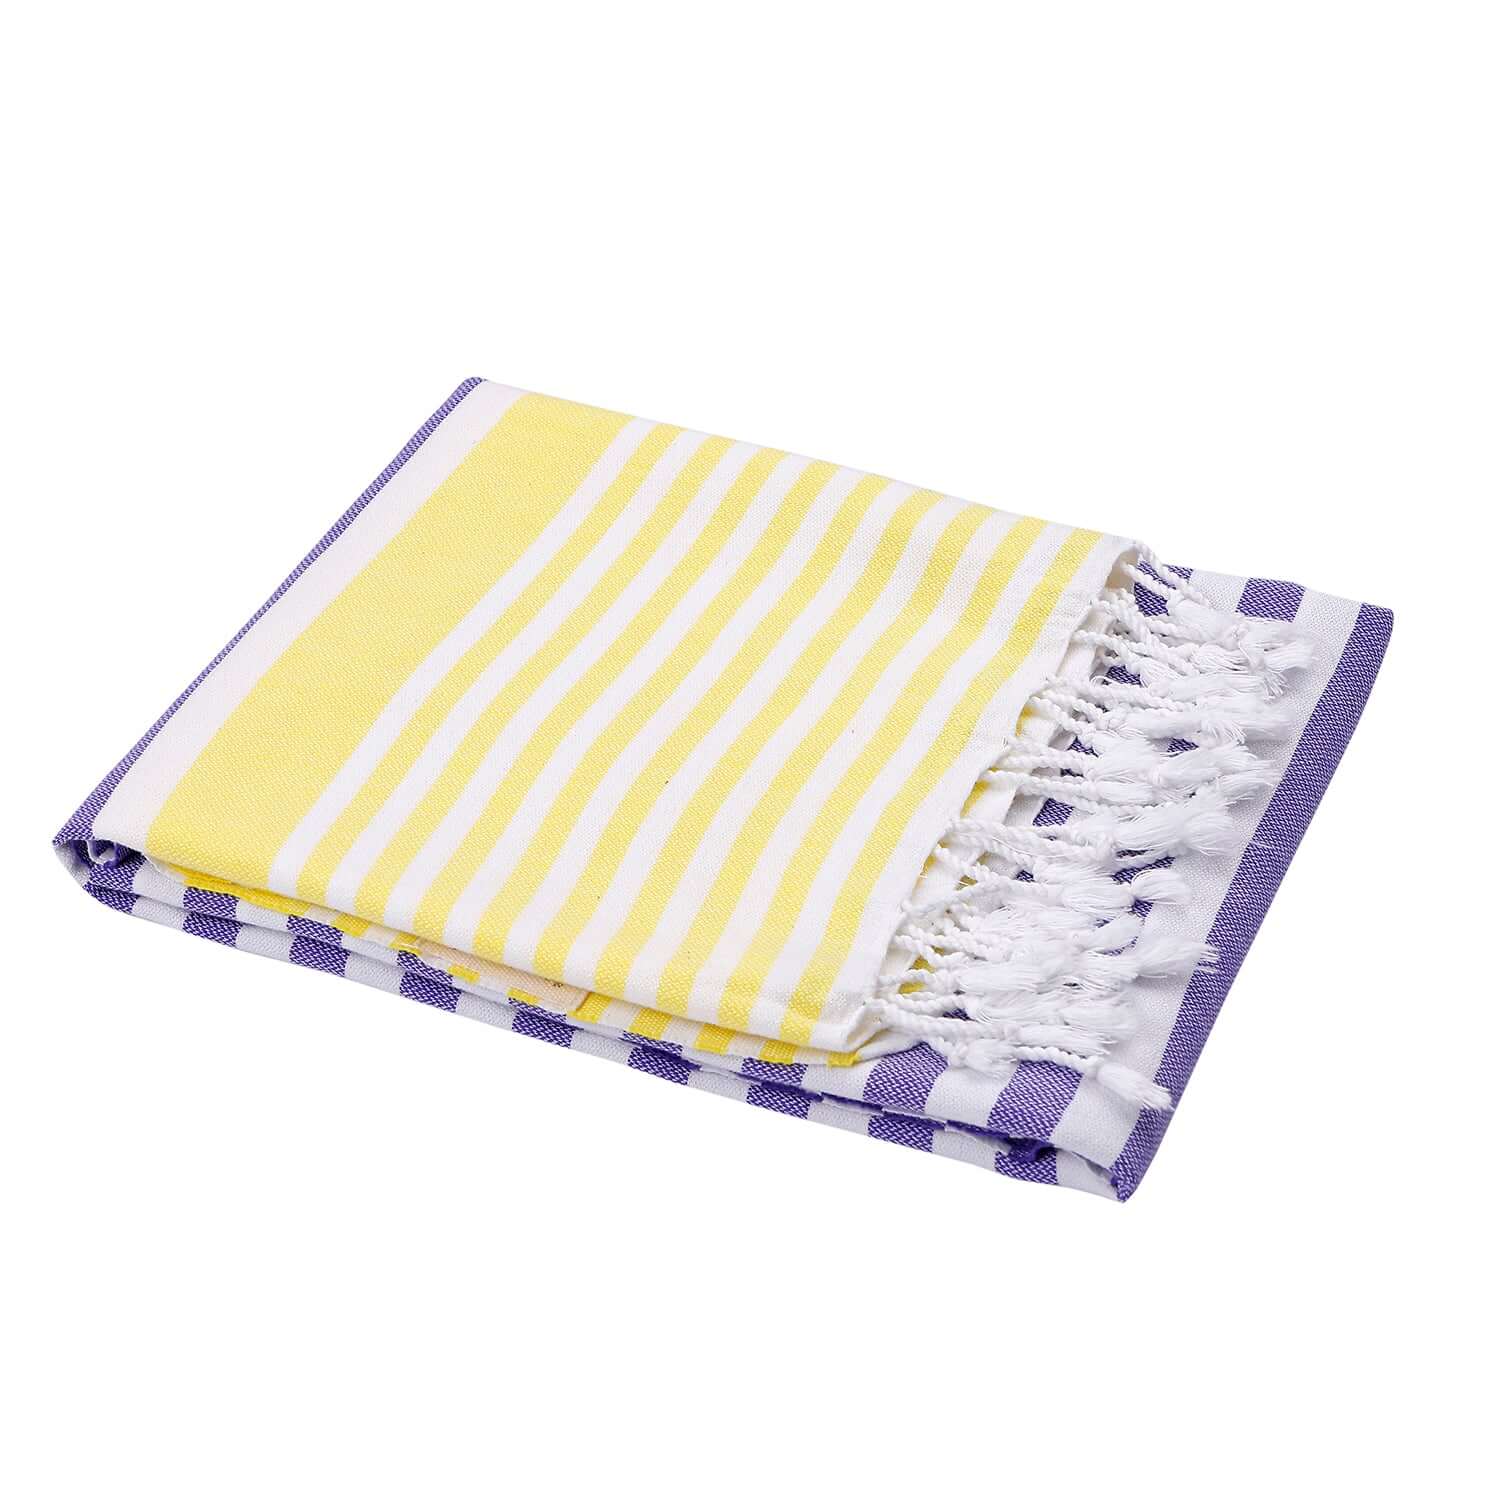 Folded Loom Legacy purple and yellow beach towel with subtle white vertical stripes. The towel features fringed white tassels on its edge, all displayed against a white background.